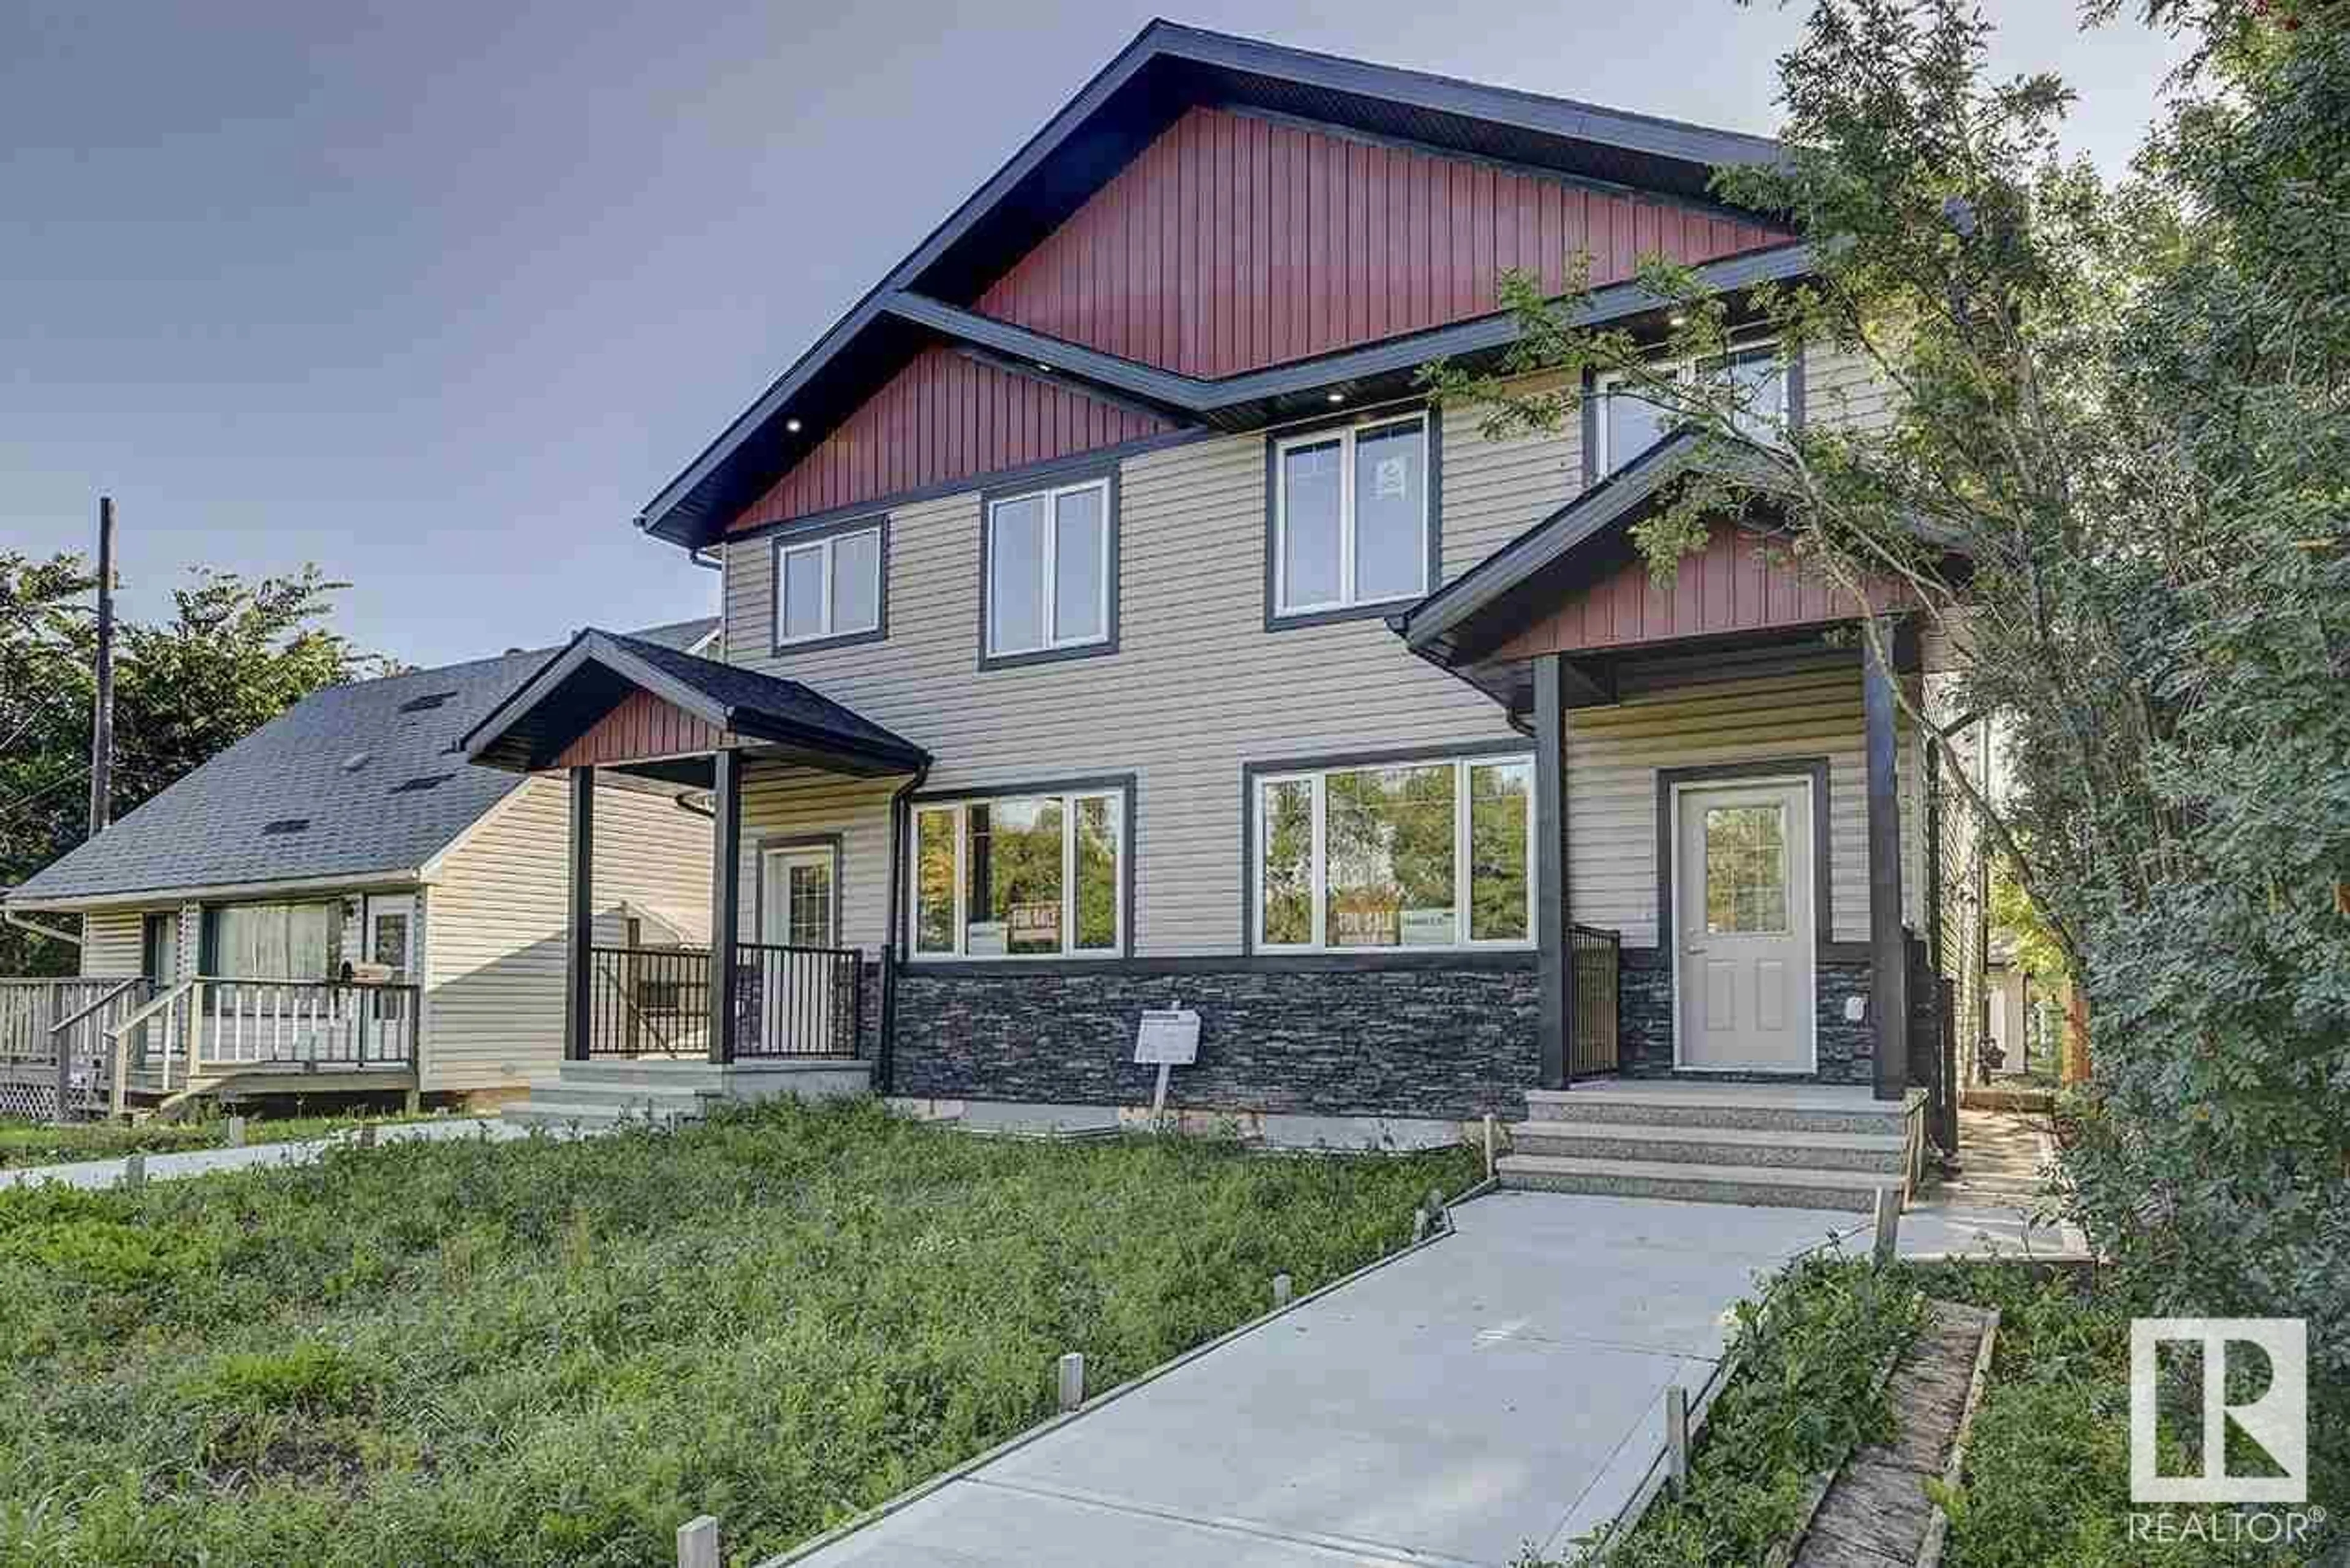 A pic from exterior of the house or condo for 10357 149 ST NW, Edmonton Alberta T5P1L4